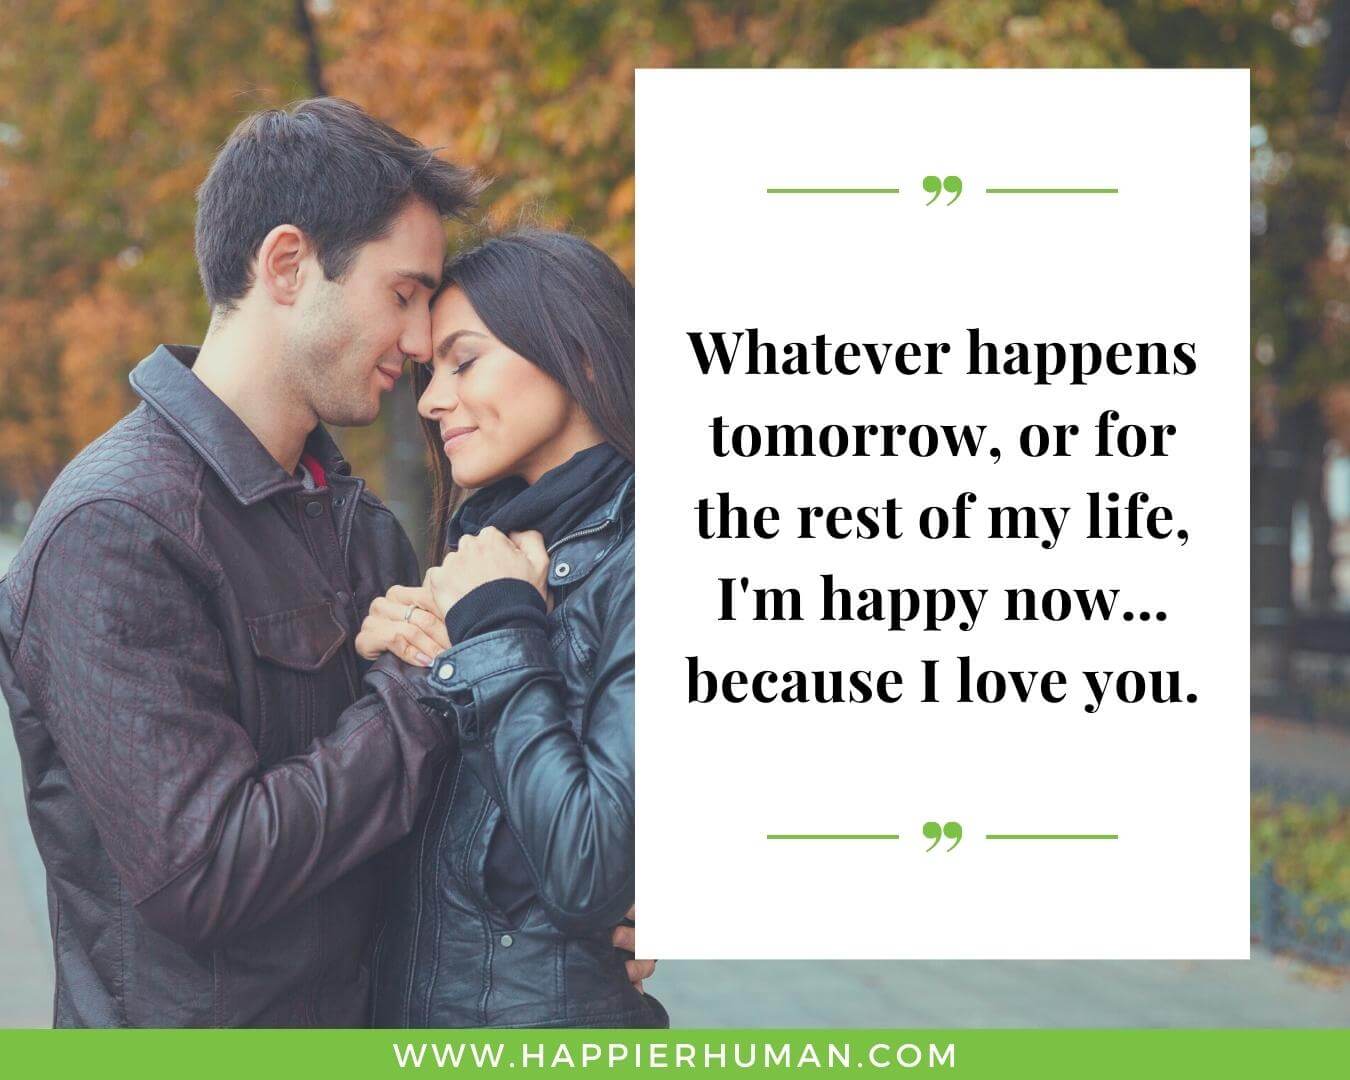 Unconditional Love Quotes for Her - “Whatever happens tomorrow, or for the rest of my life, I'm happy now… because I love you.”